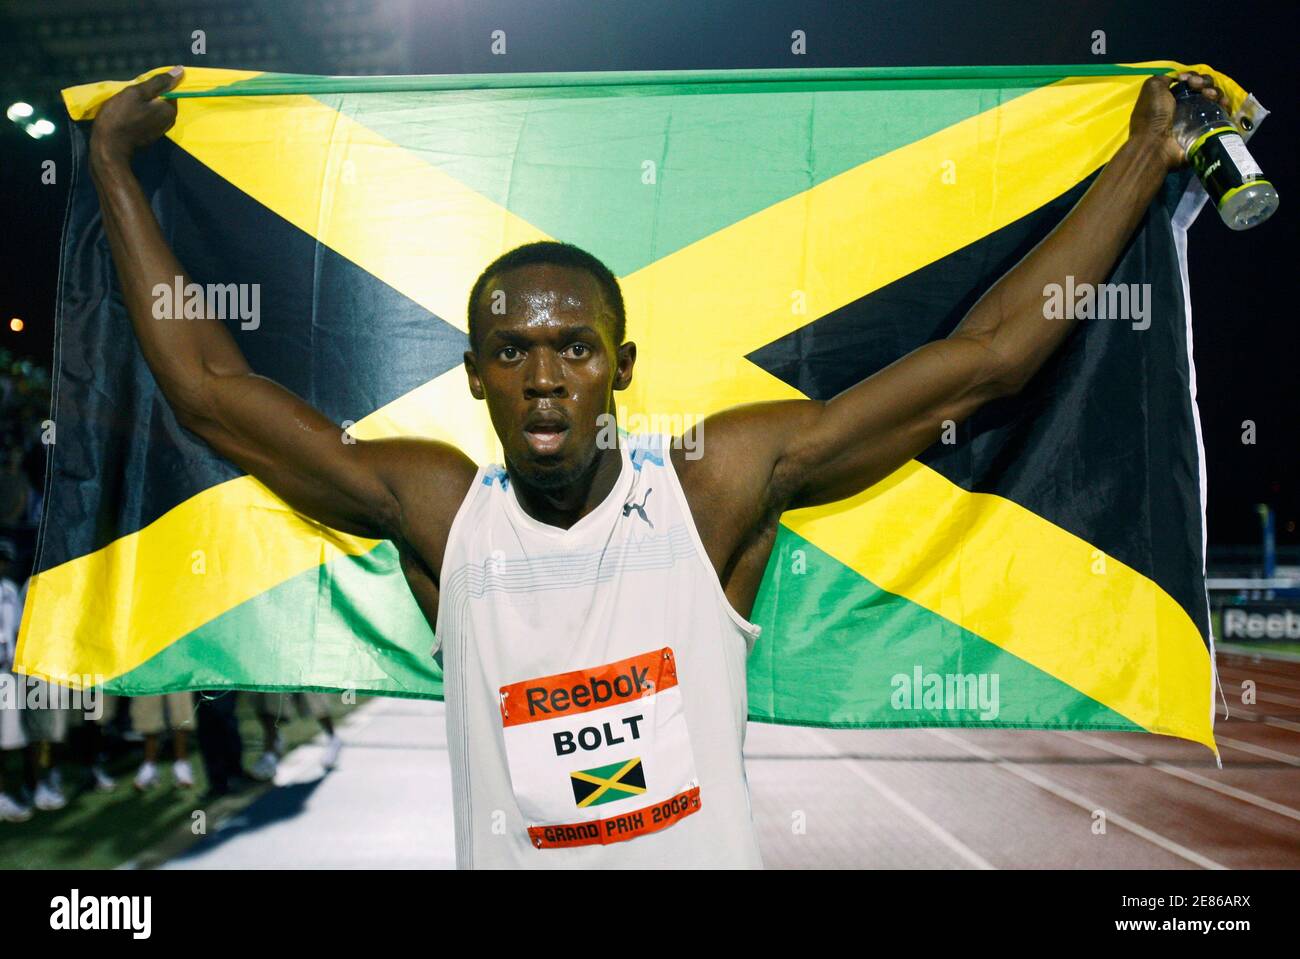 Usain Bolt of Jamaica celebrates after setting a new world record in the  men's 100 meters race next at the Reebok Grand Prix athletics meet in New  York, May 31, 2008. Bolt